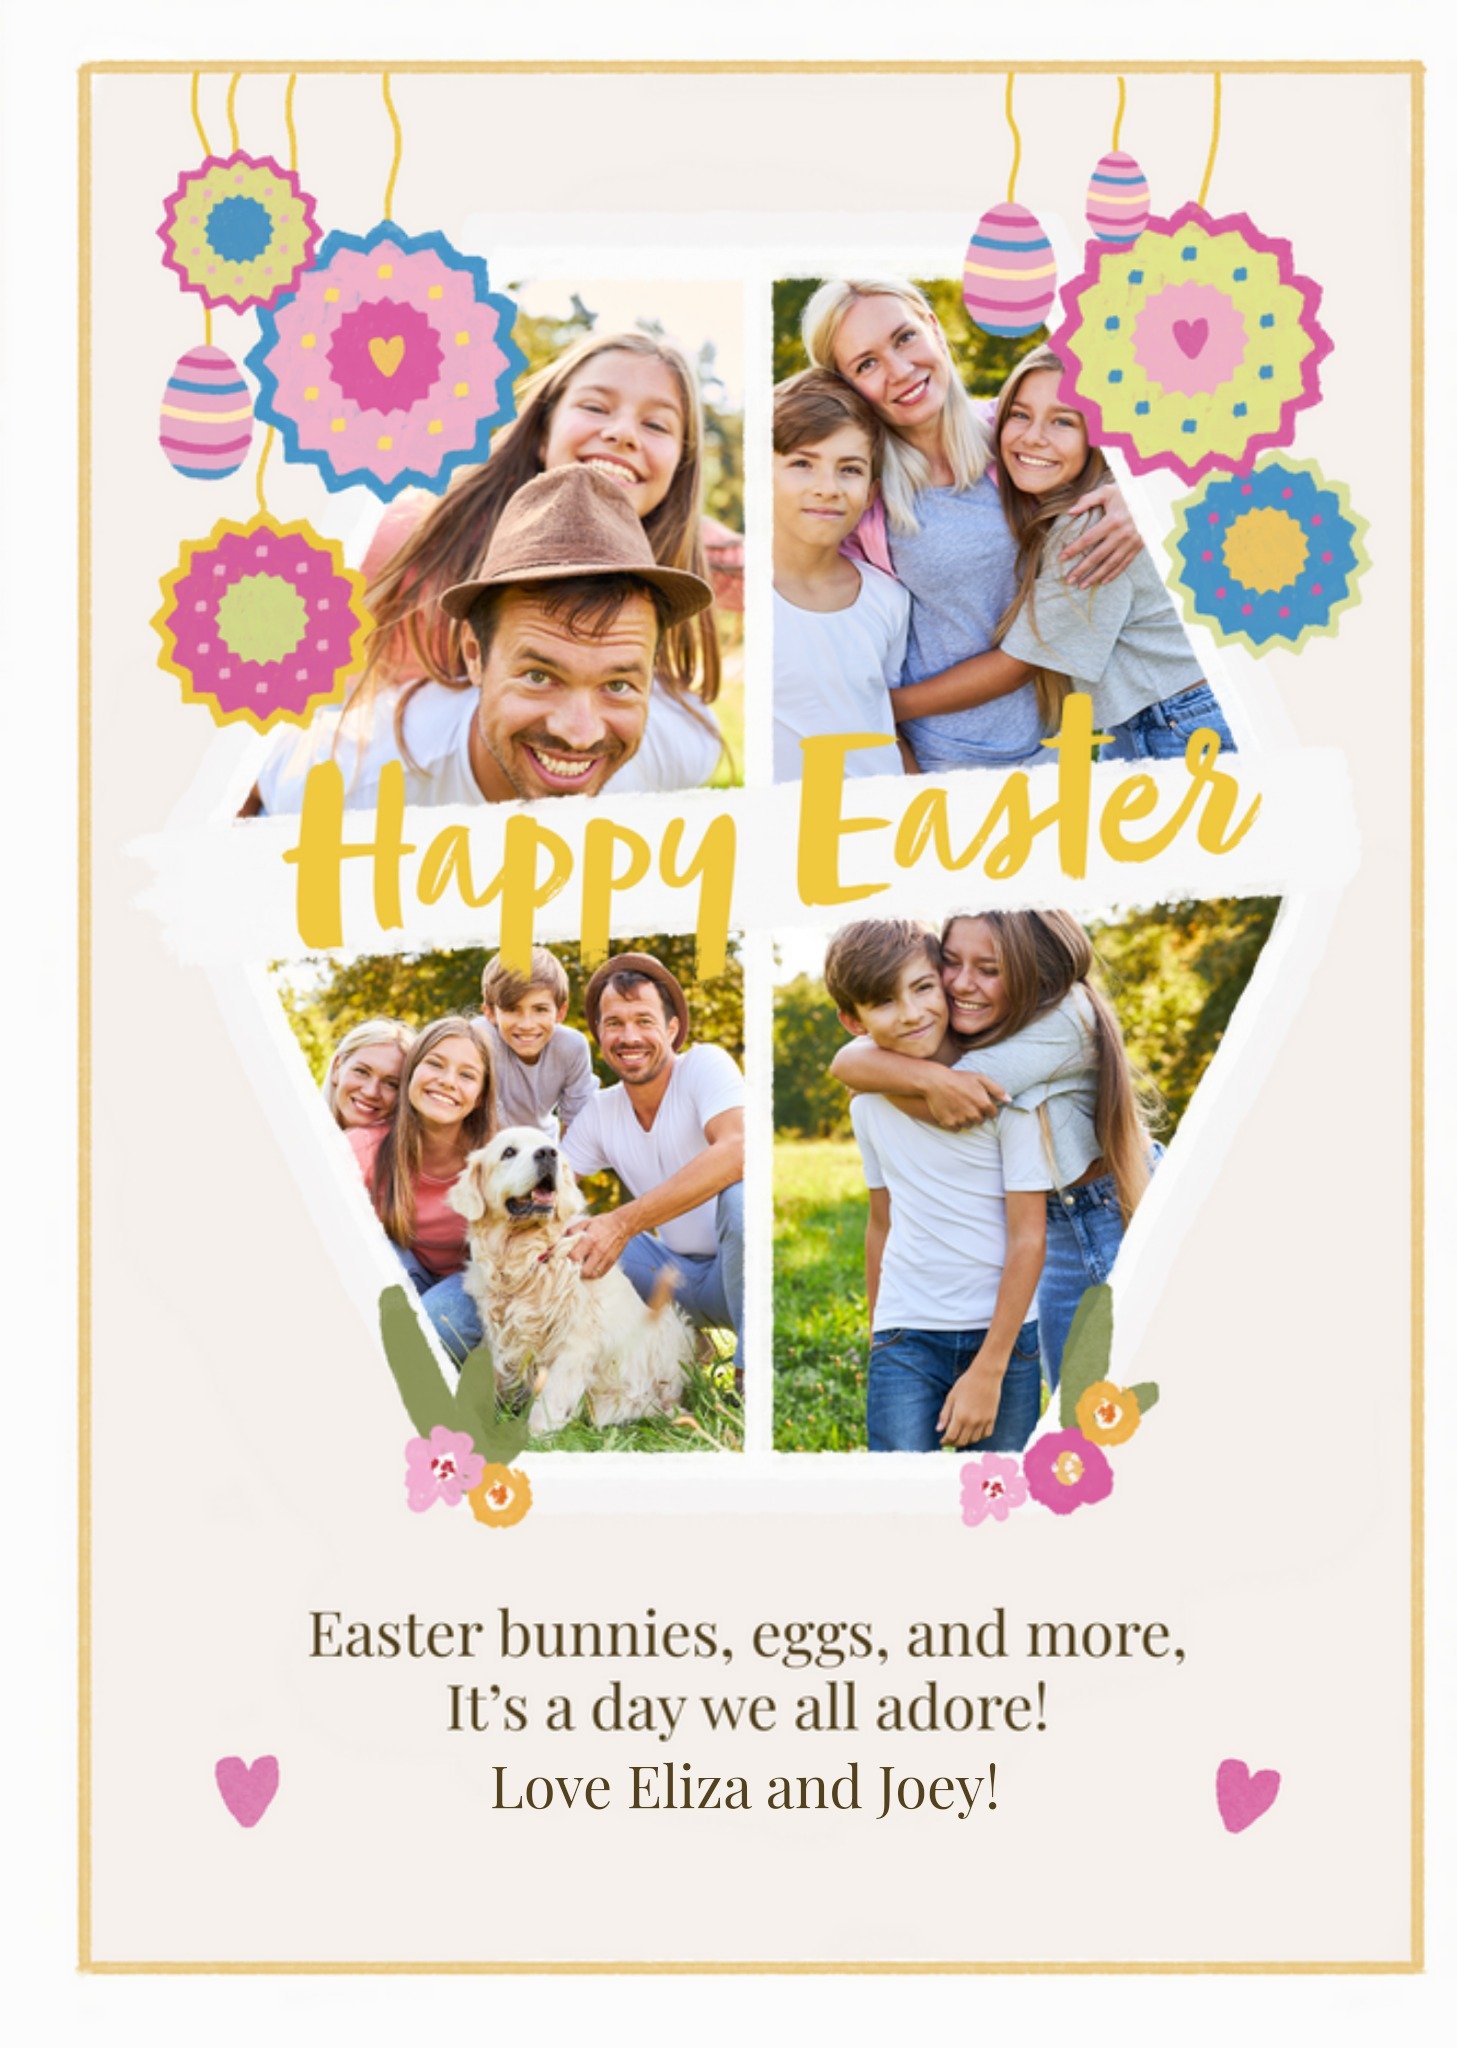 Moonpig Dreamer Happy Easter Bunnies Eggs And More Photo Upload Easter Card, Large